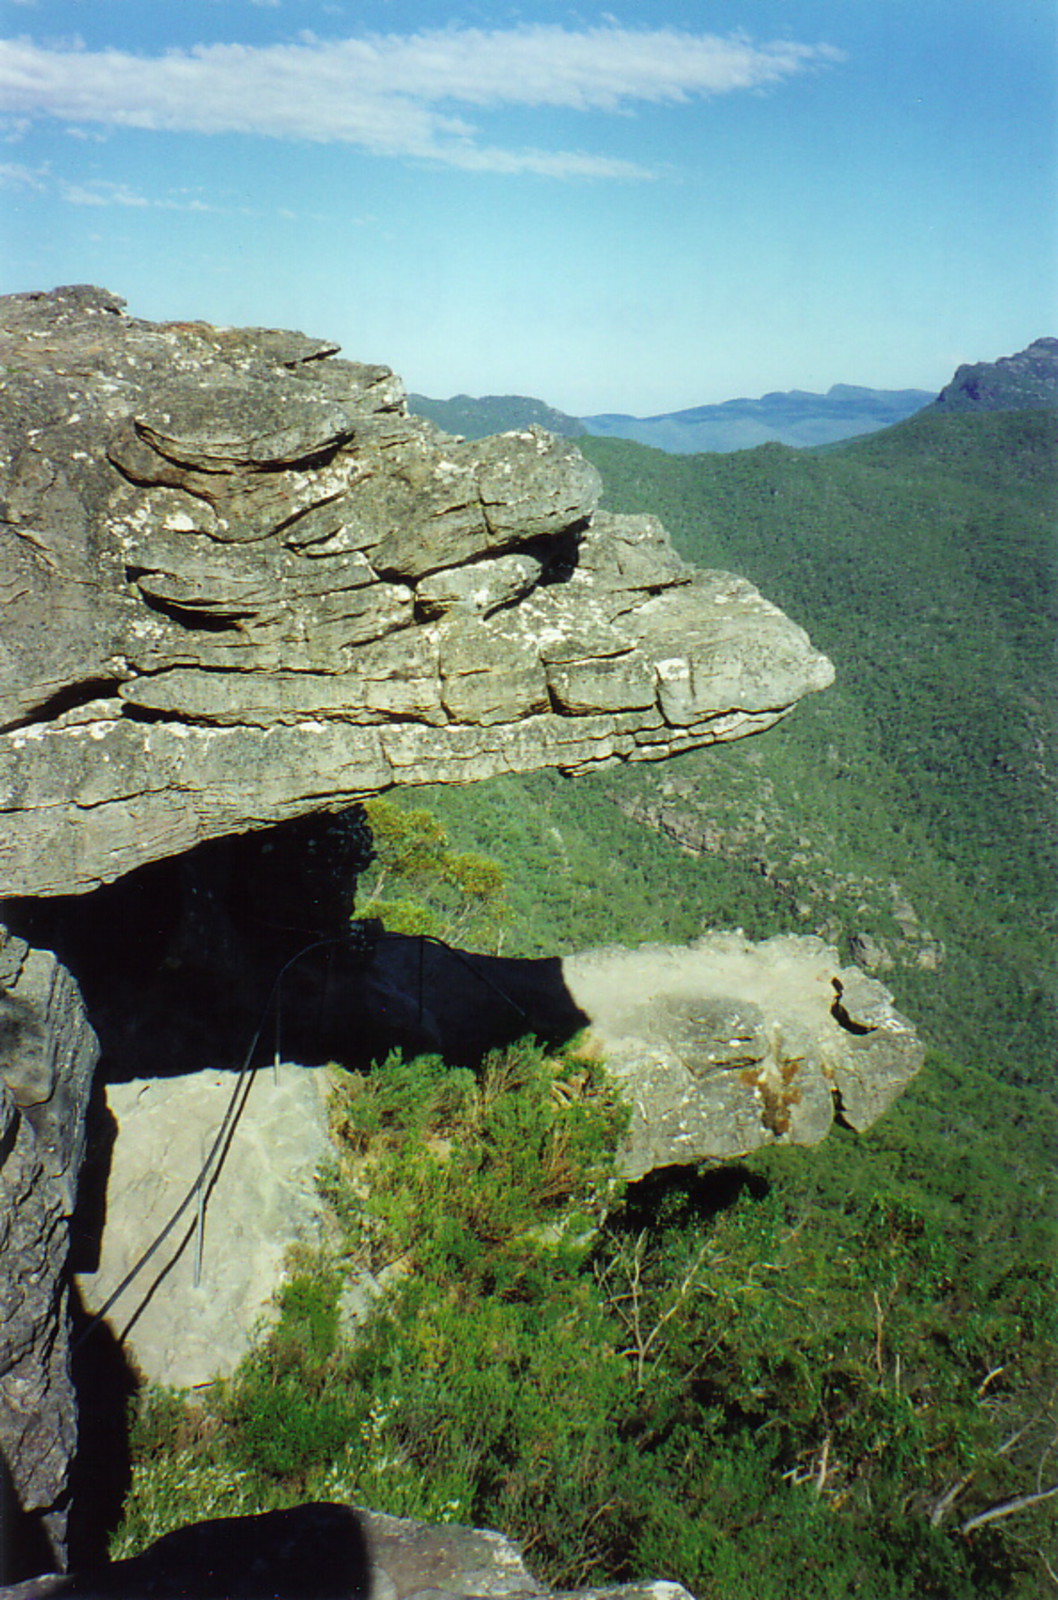 The rock formation called the Balconies